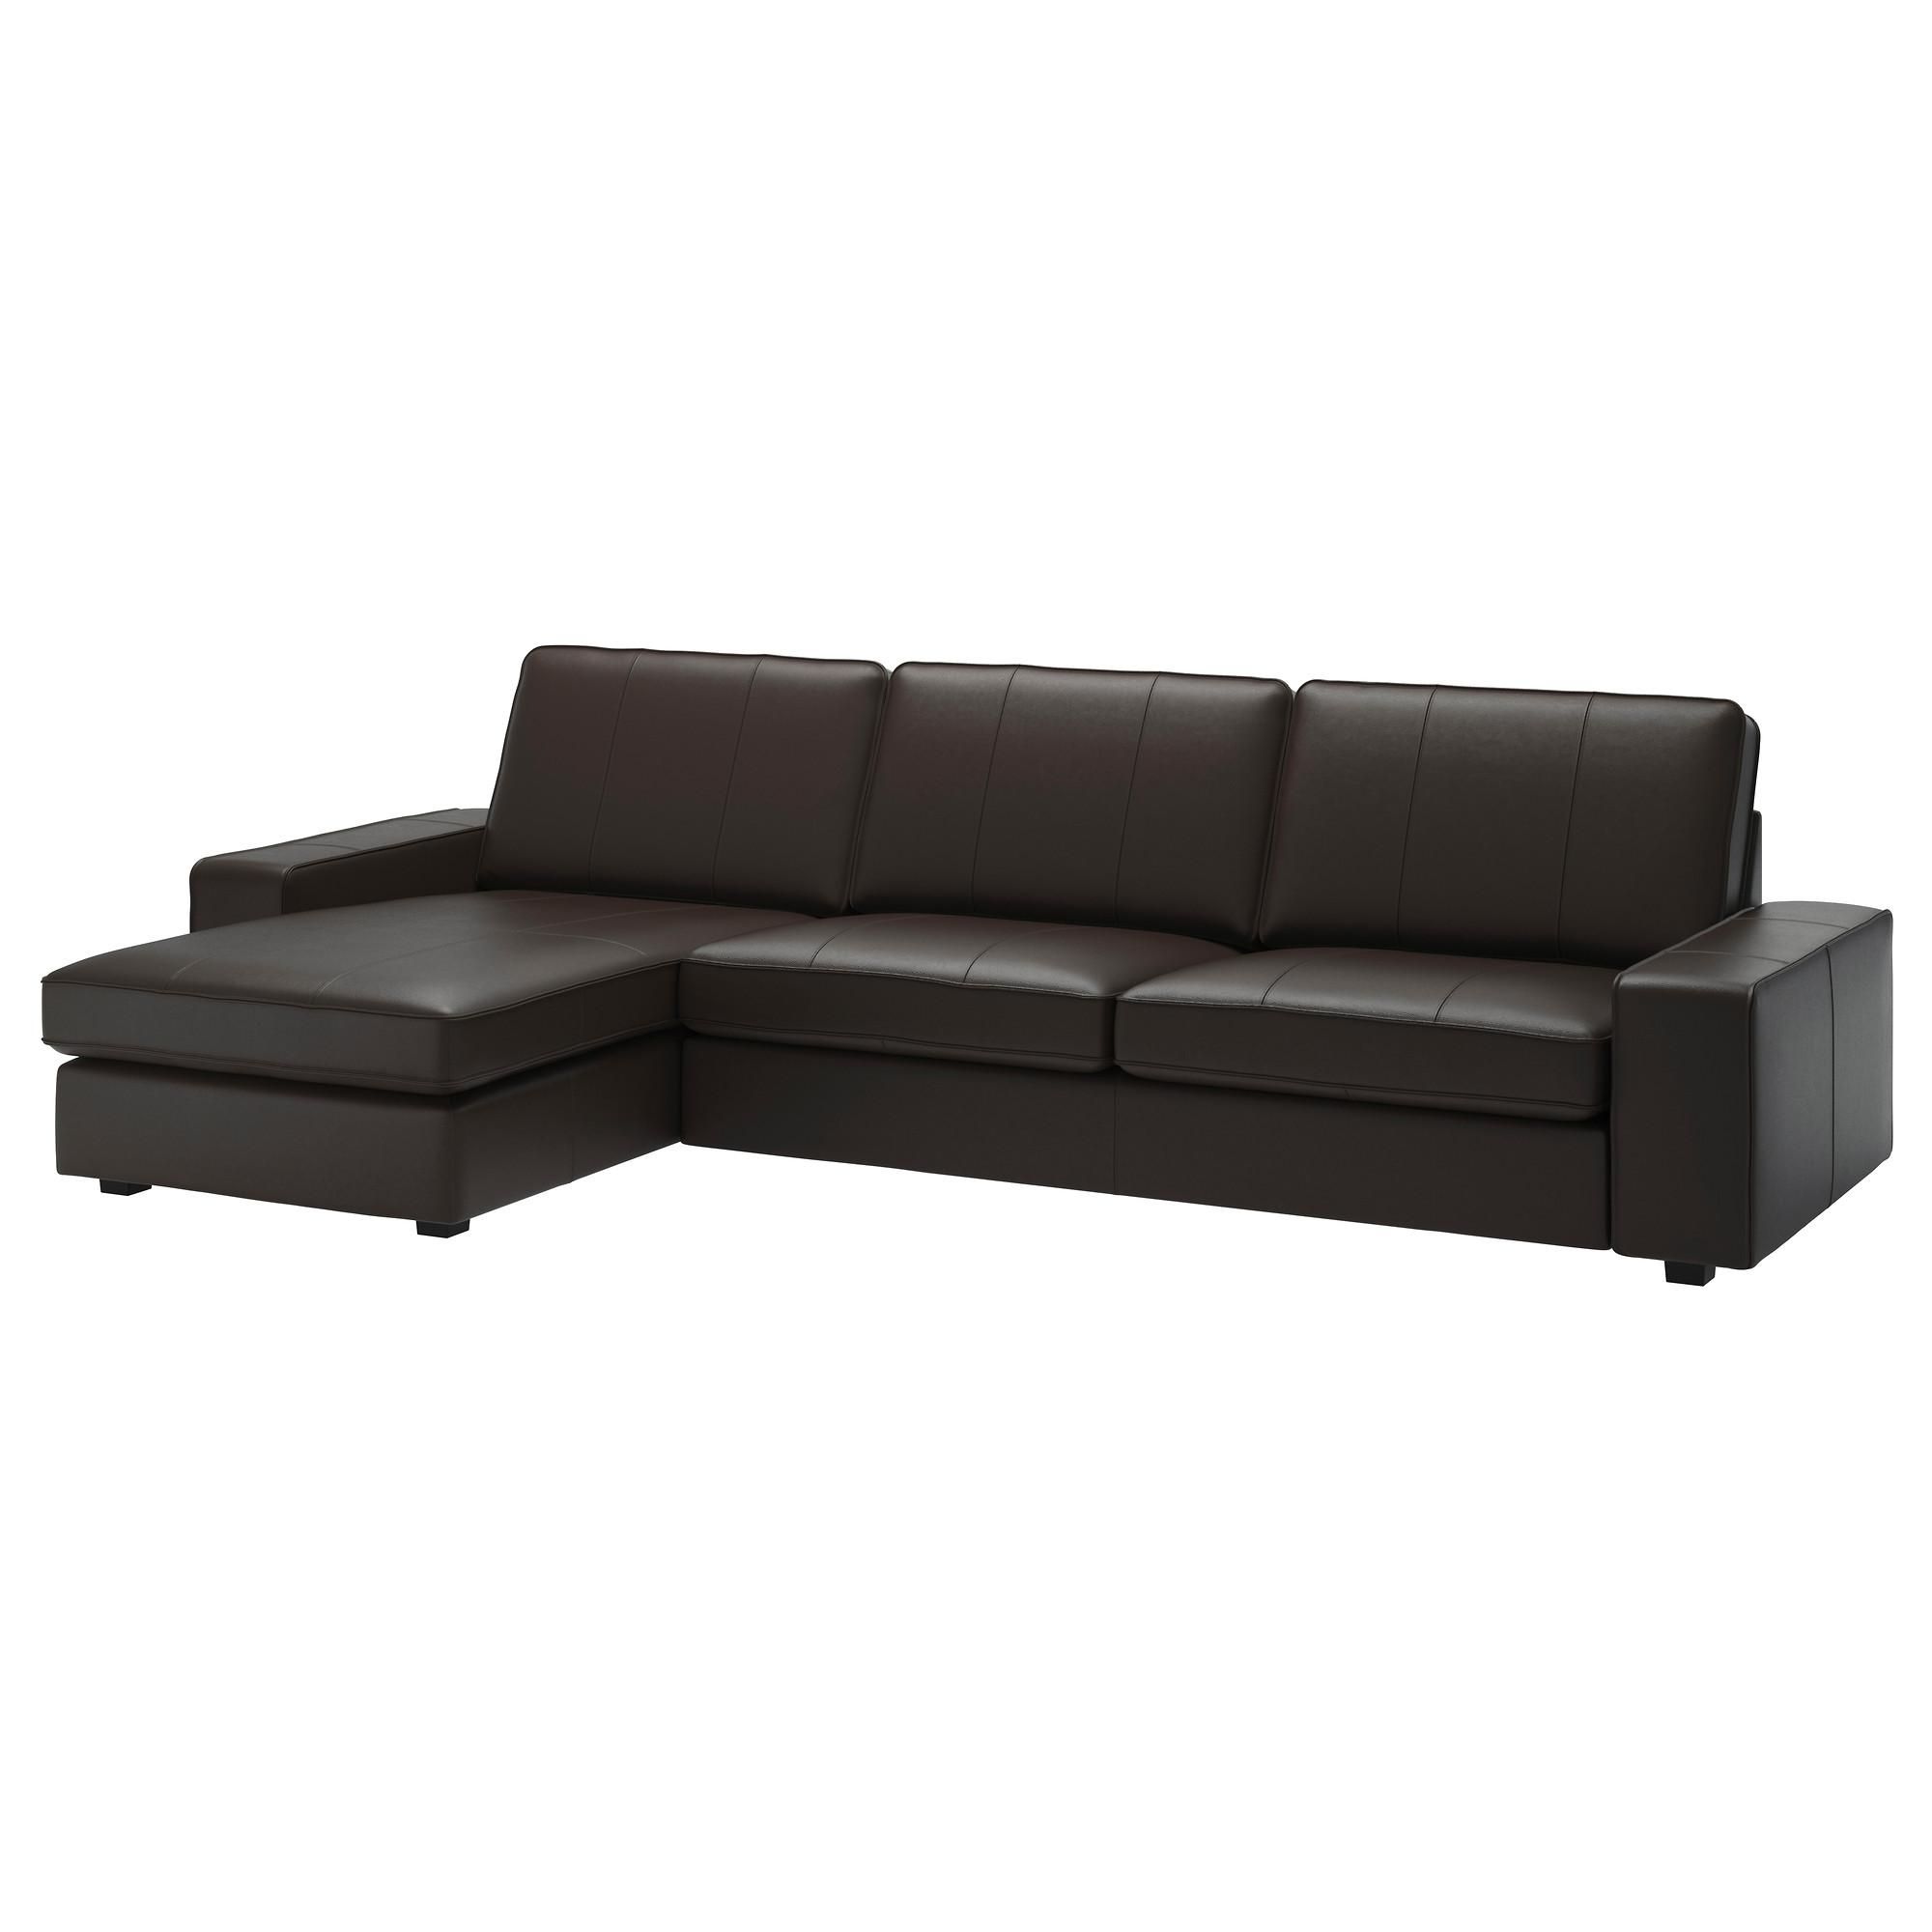 Kivik 4 Seat Sofa With Chaise Longue/grann/bomstad Dark Brown – Ikea Intended For Ikea Chaise Lounge Sofa (View 15 of 20)